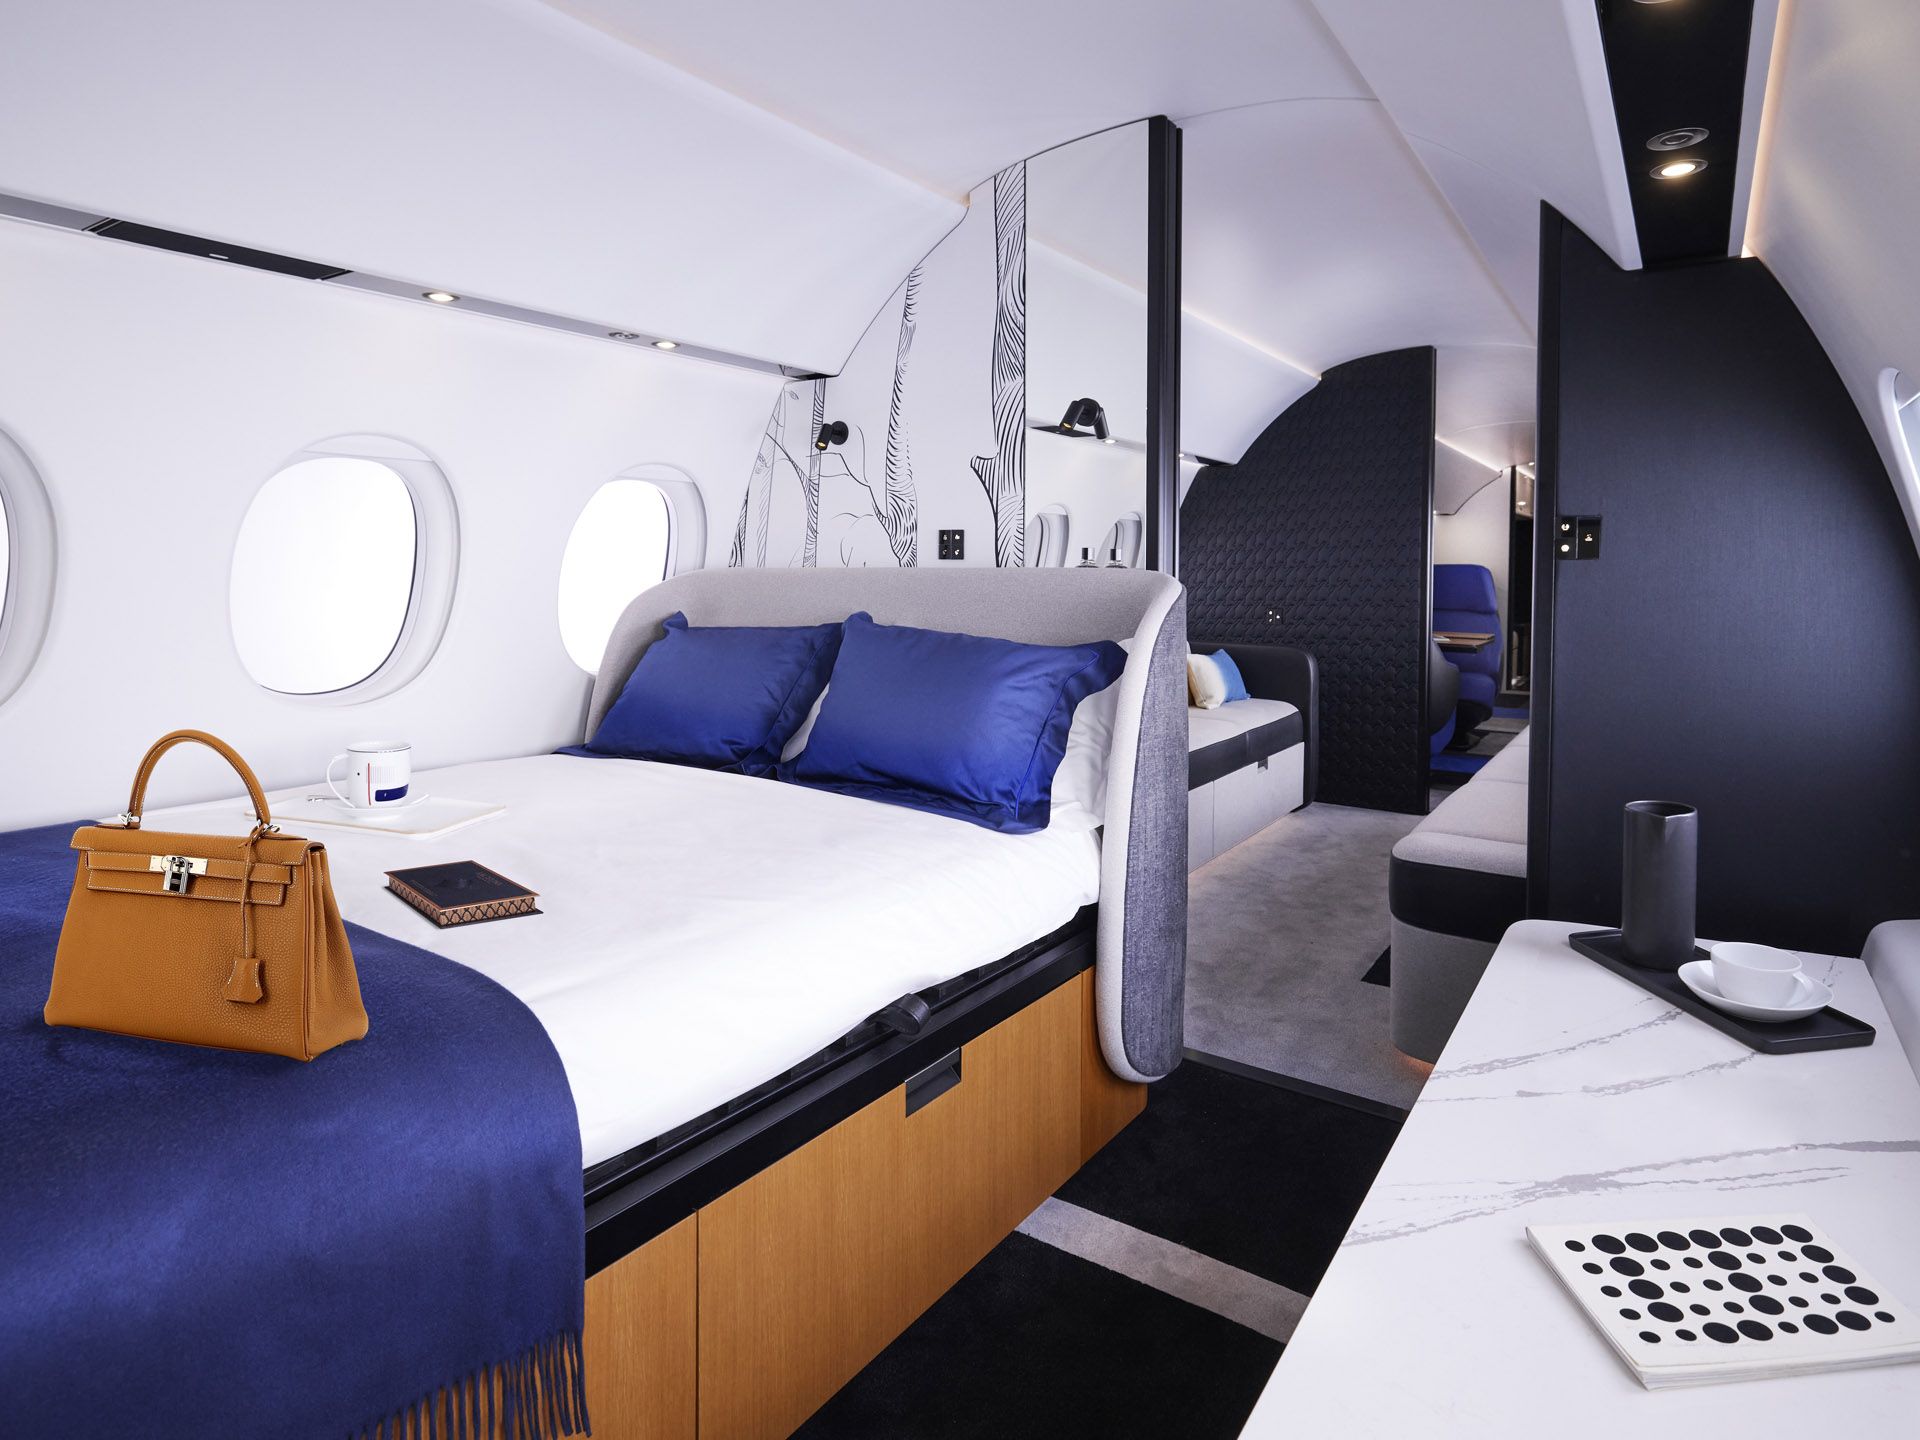 Luxoria - A private jet interior like no other we have... | Facebook